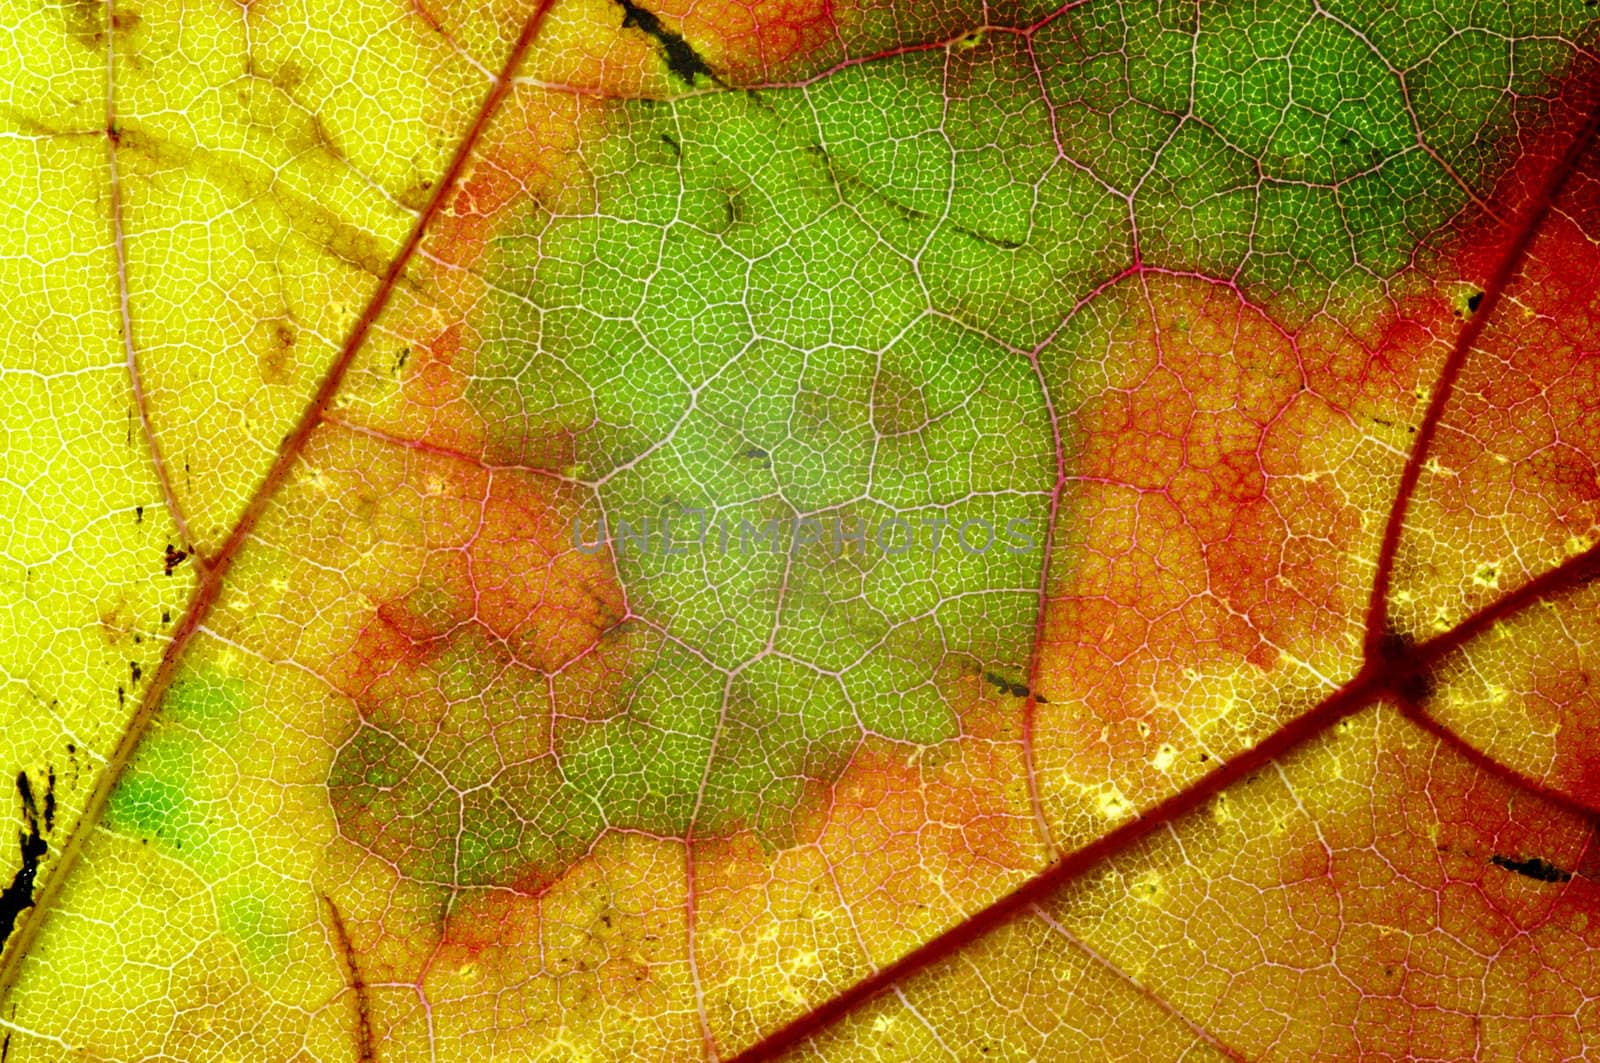 Detail (close-up) of the autumn leaf